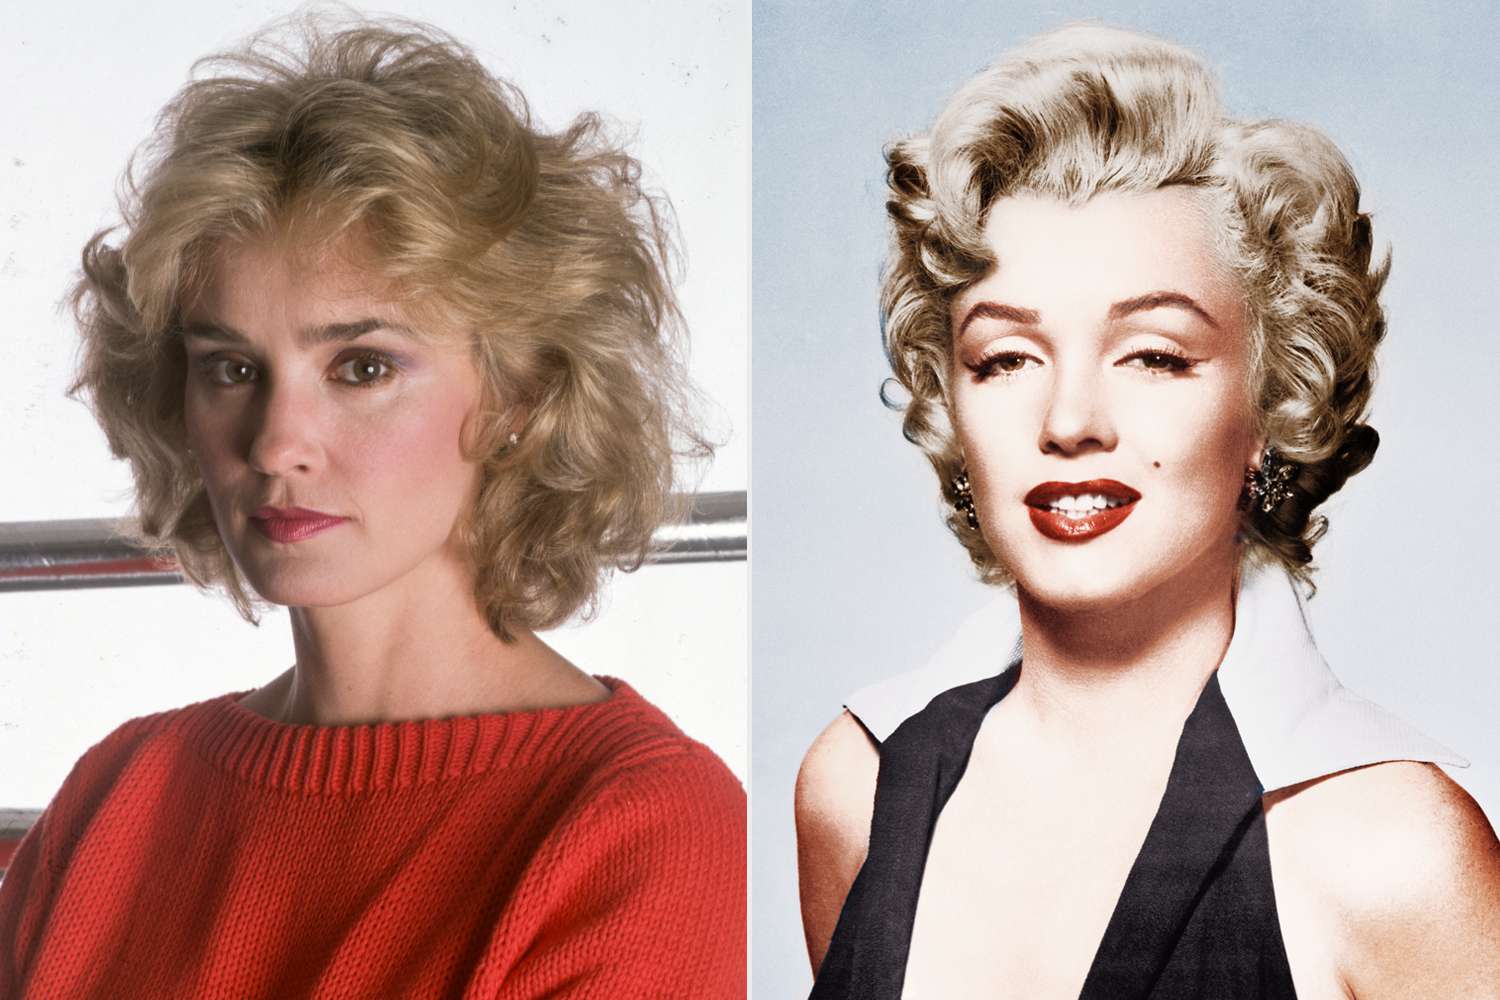 Jessica Lange Told PEOPLE in 1977 Being Compared to Marilyn Monroe ‘Upsets’ Her — Here’s Why